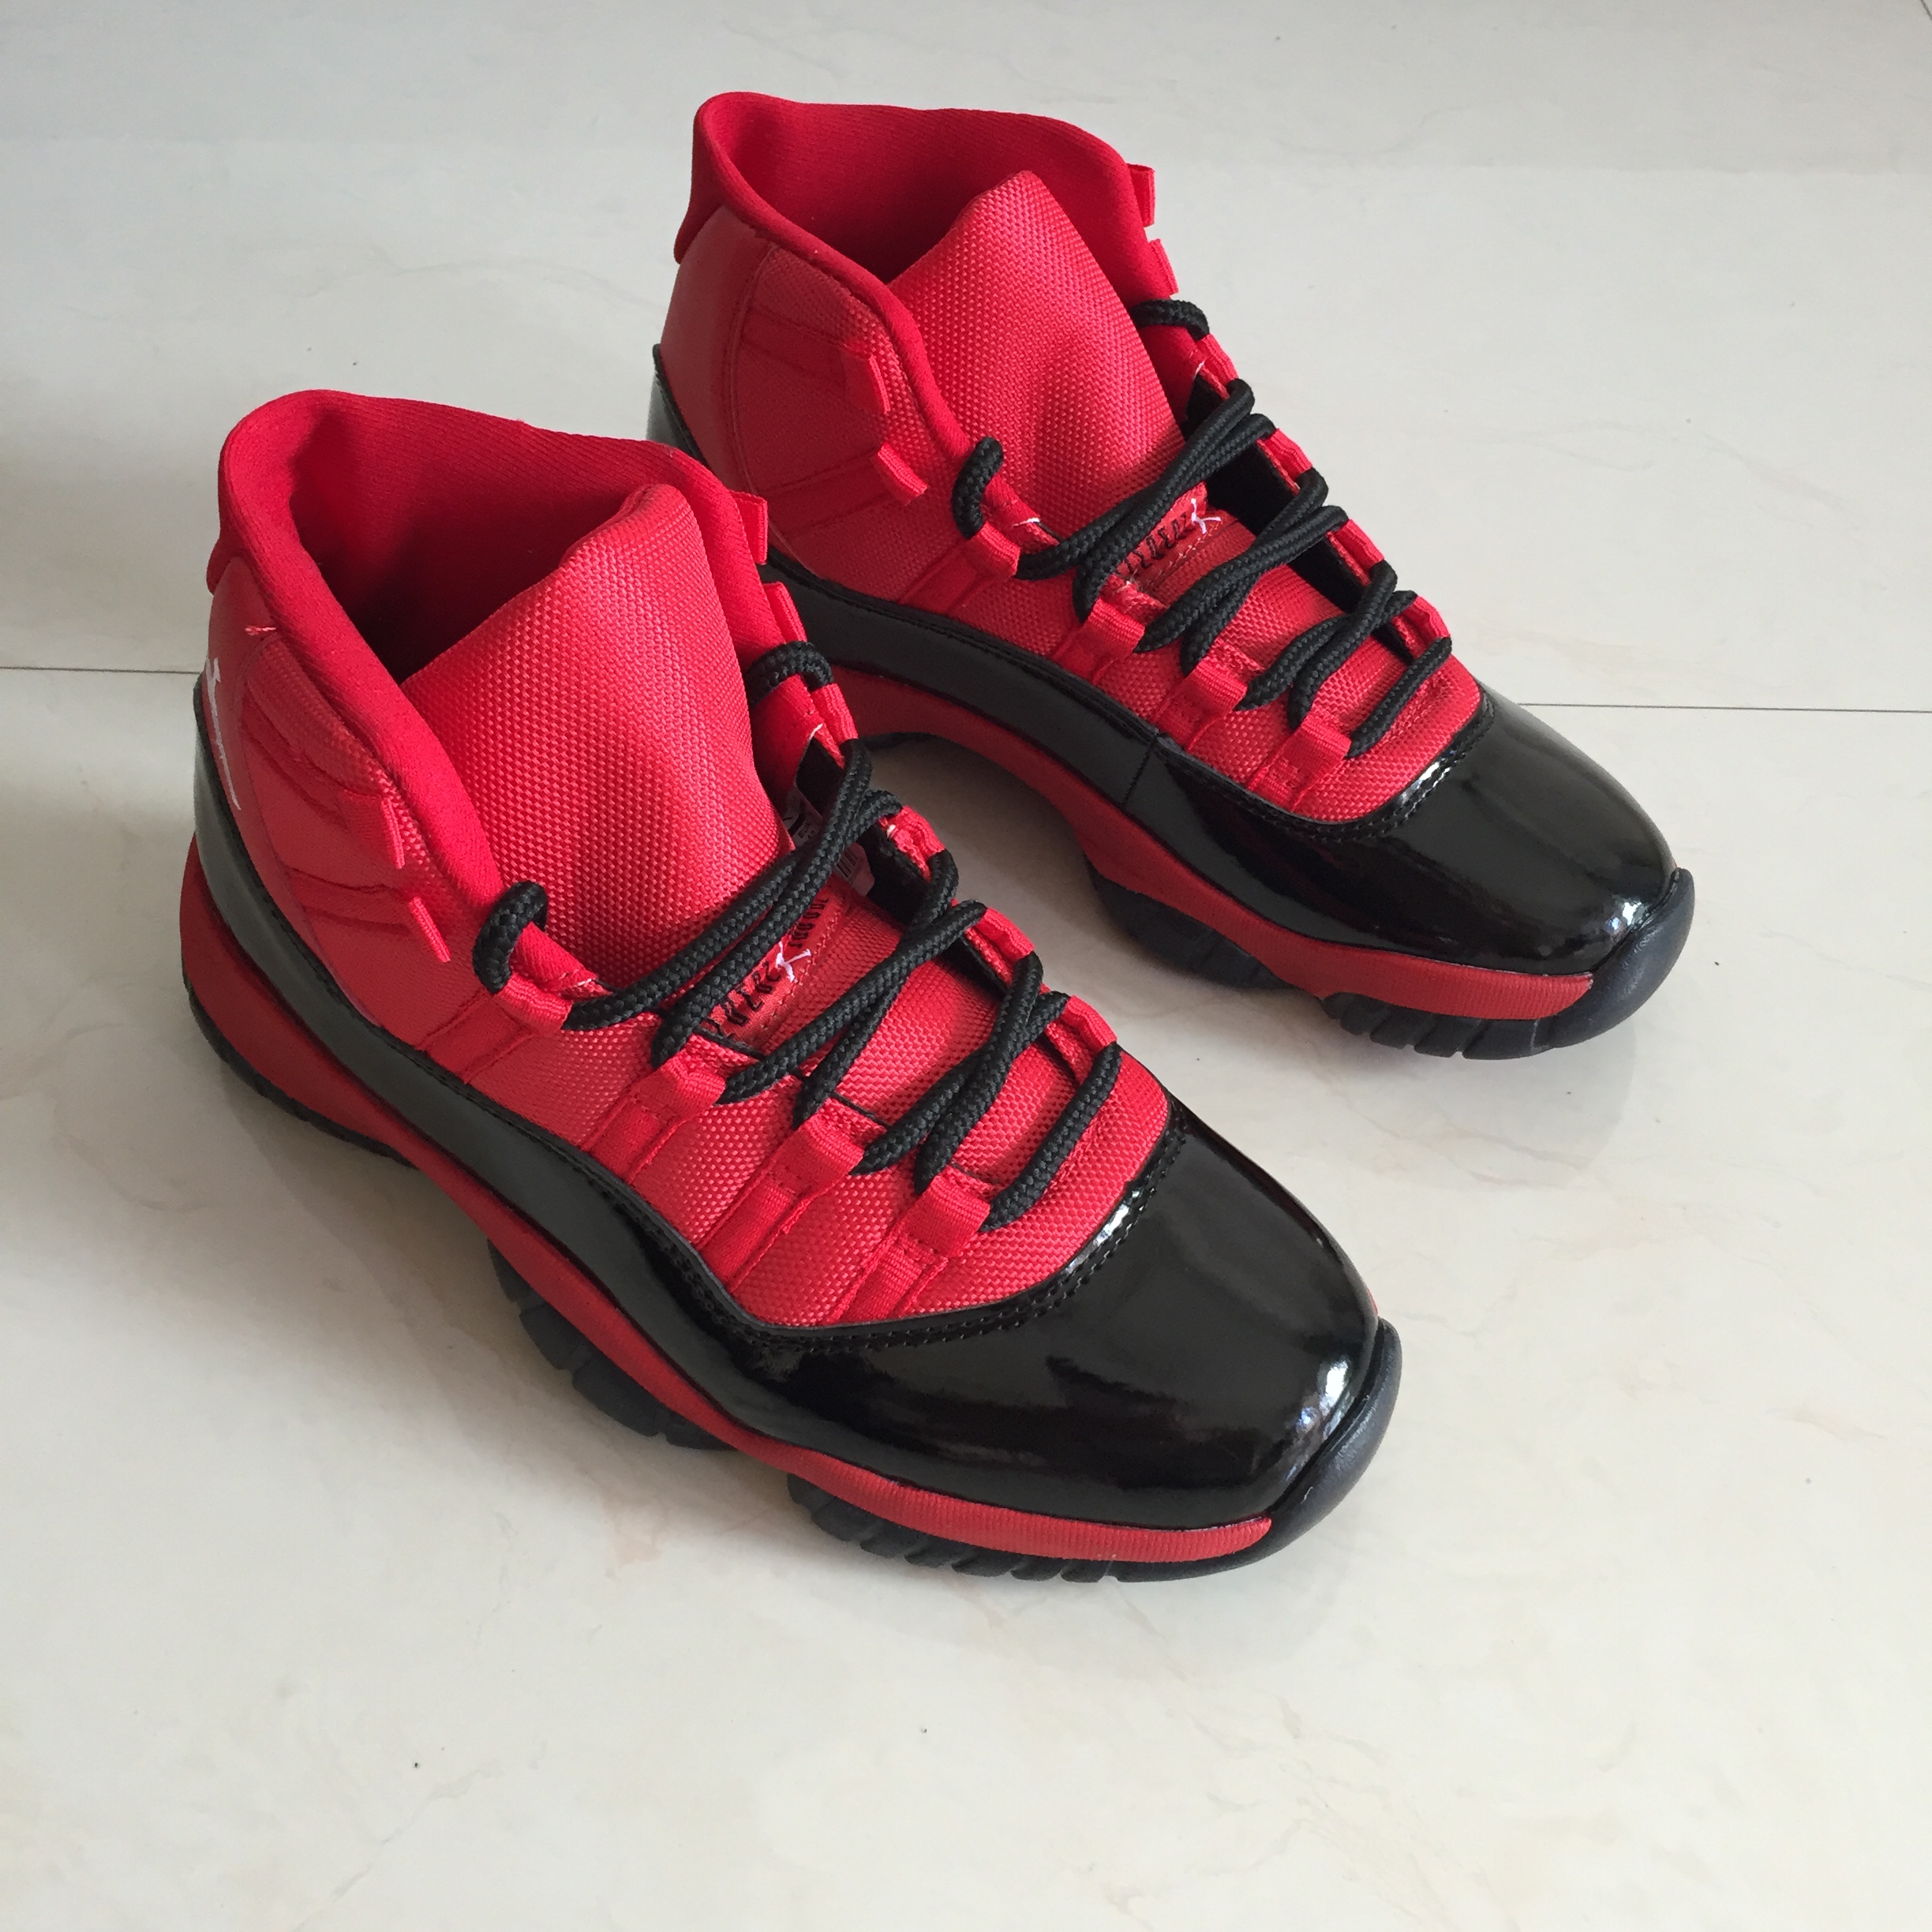 jordan 11 red and black for sale